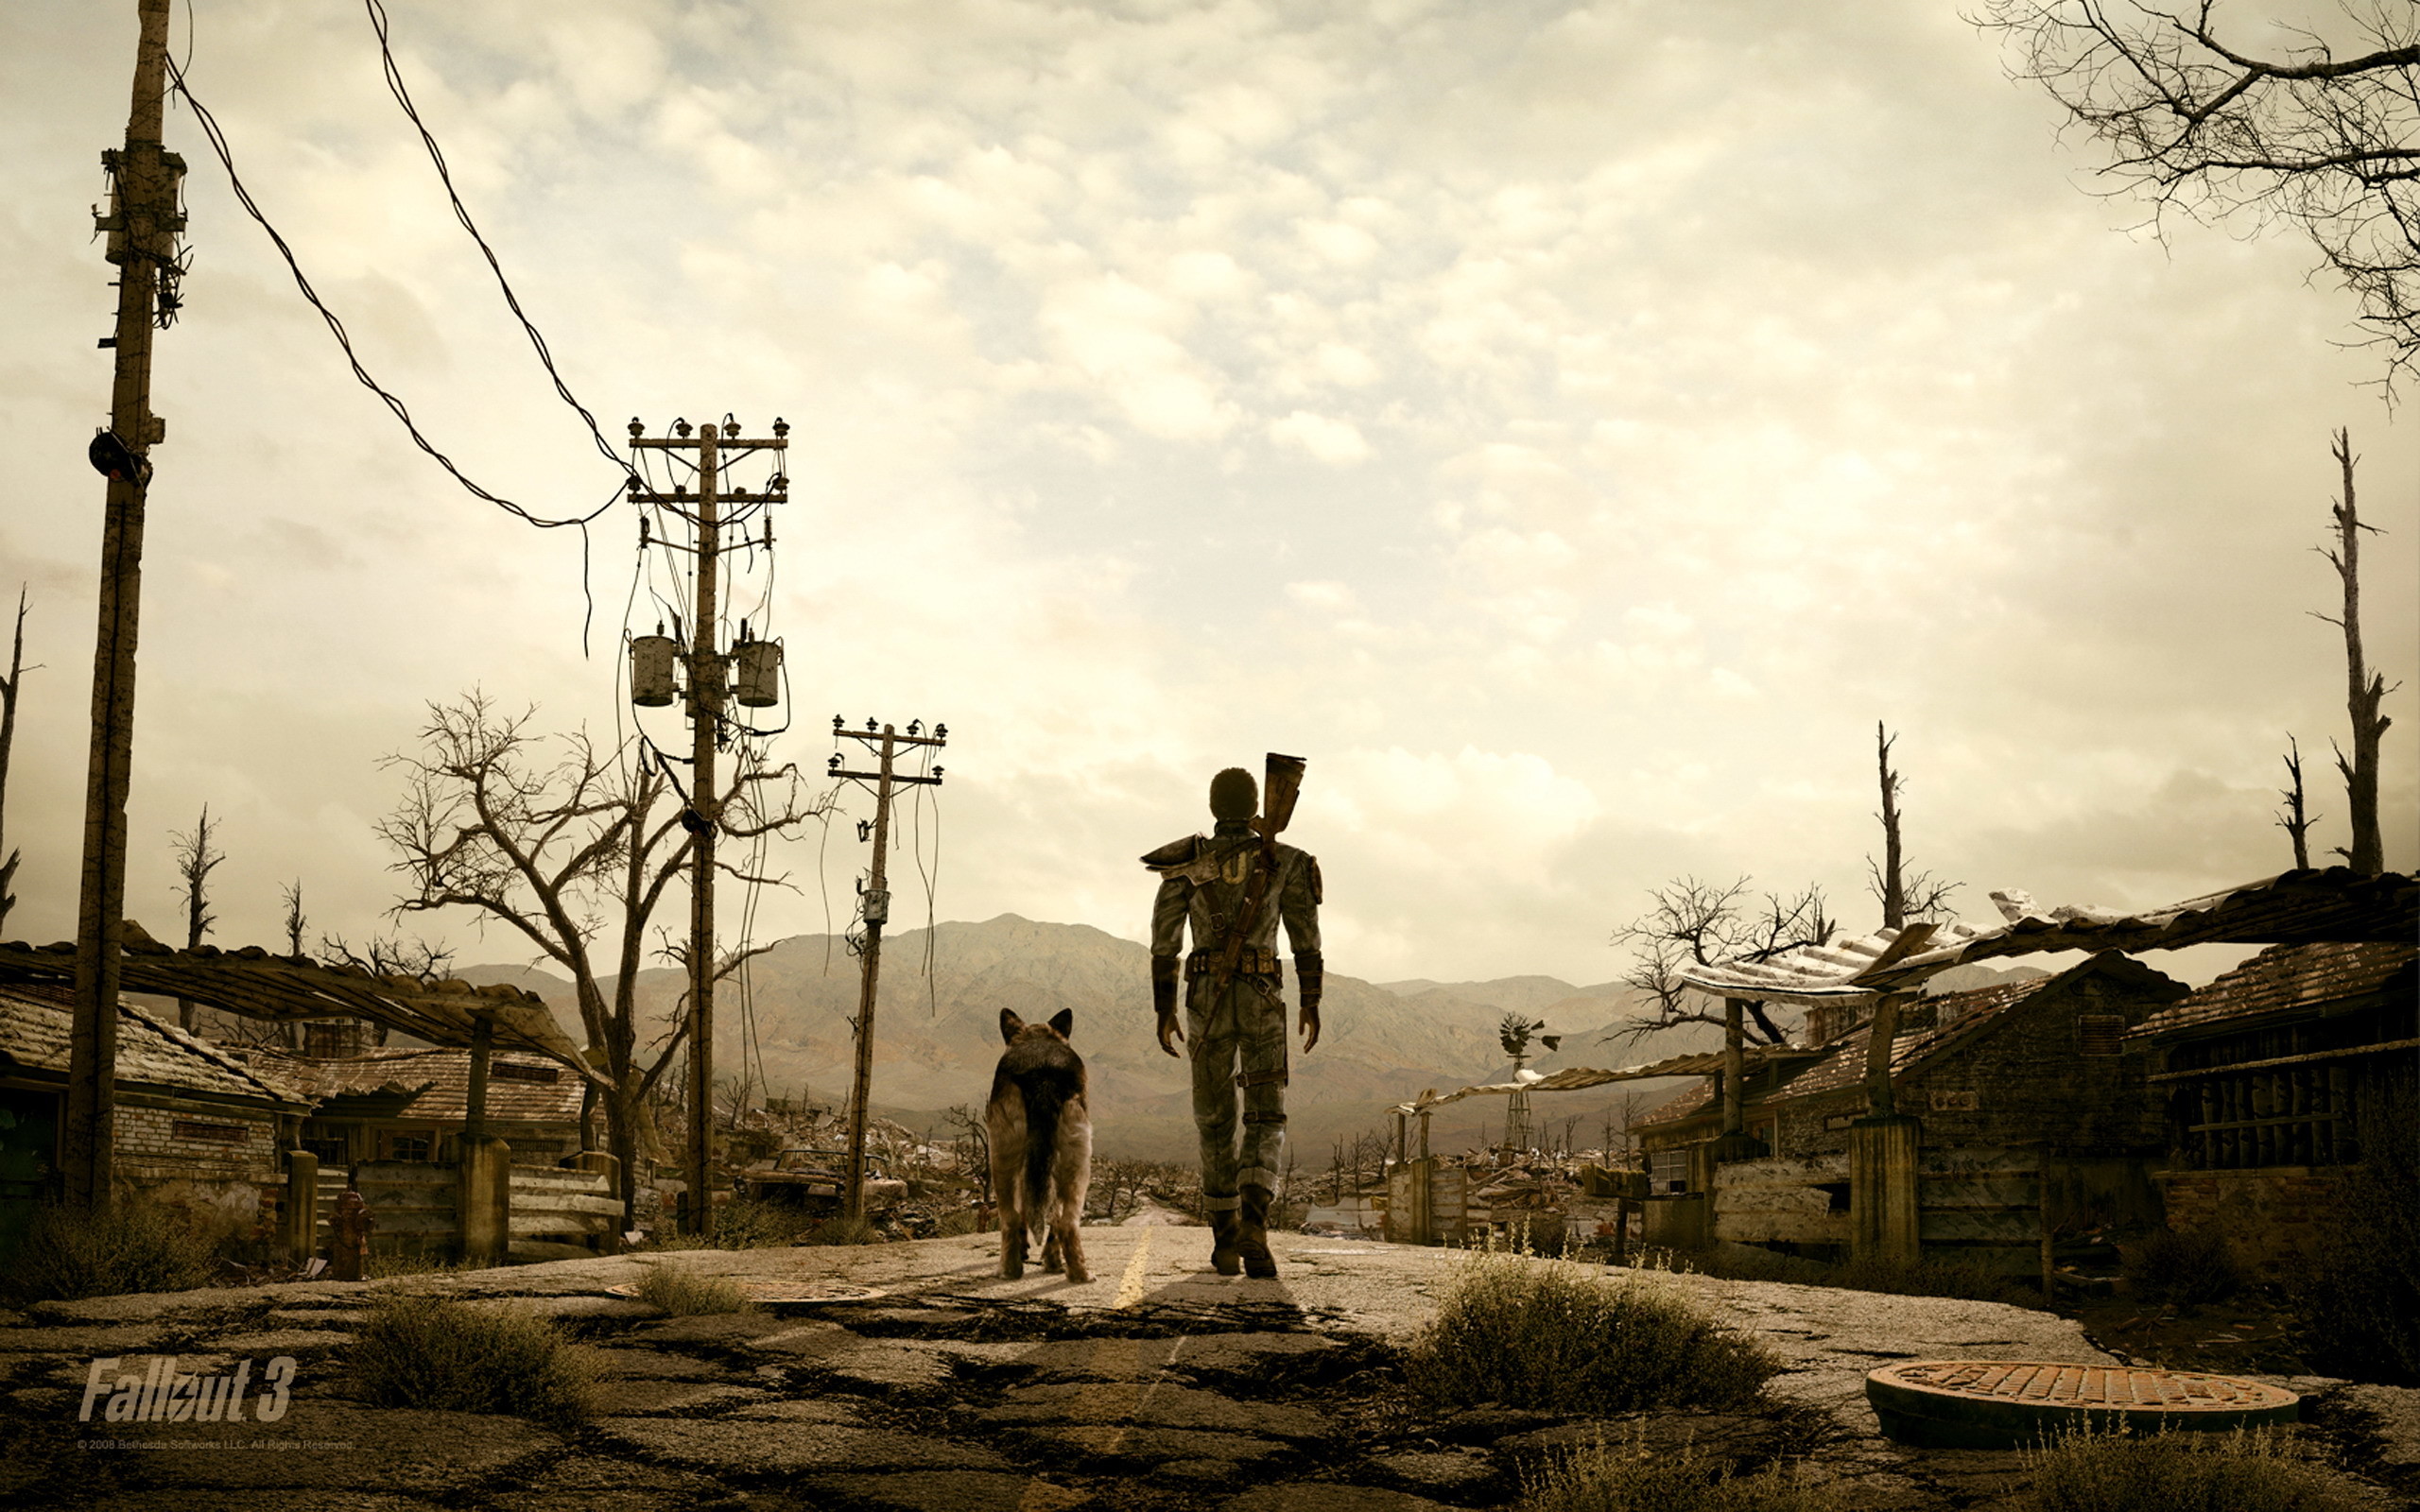 2560x1600 Fallout Wallpapers Wallpaper | HD Wallpapers | Pinterest | Fallout and  Wallpaper